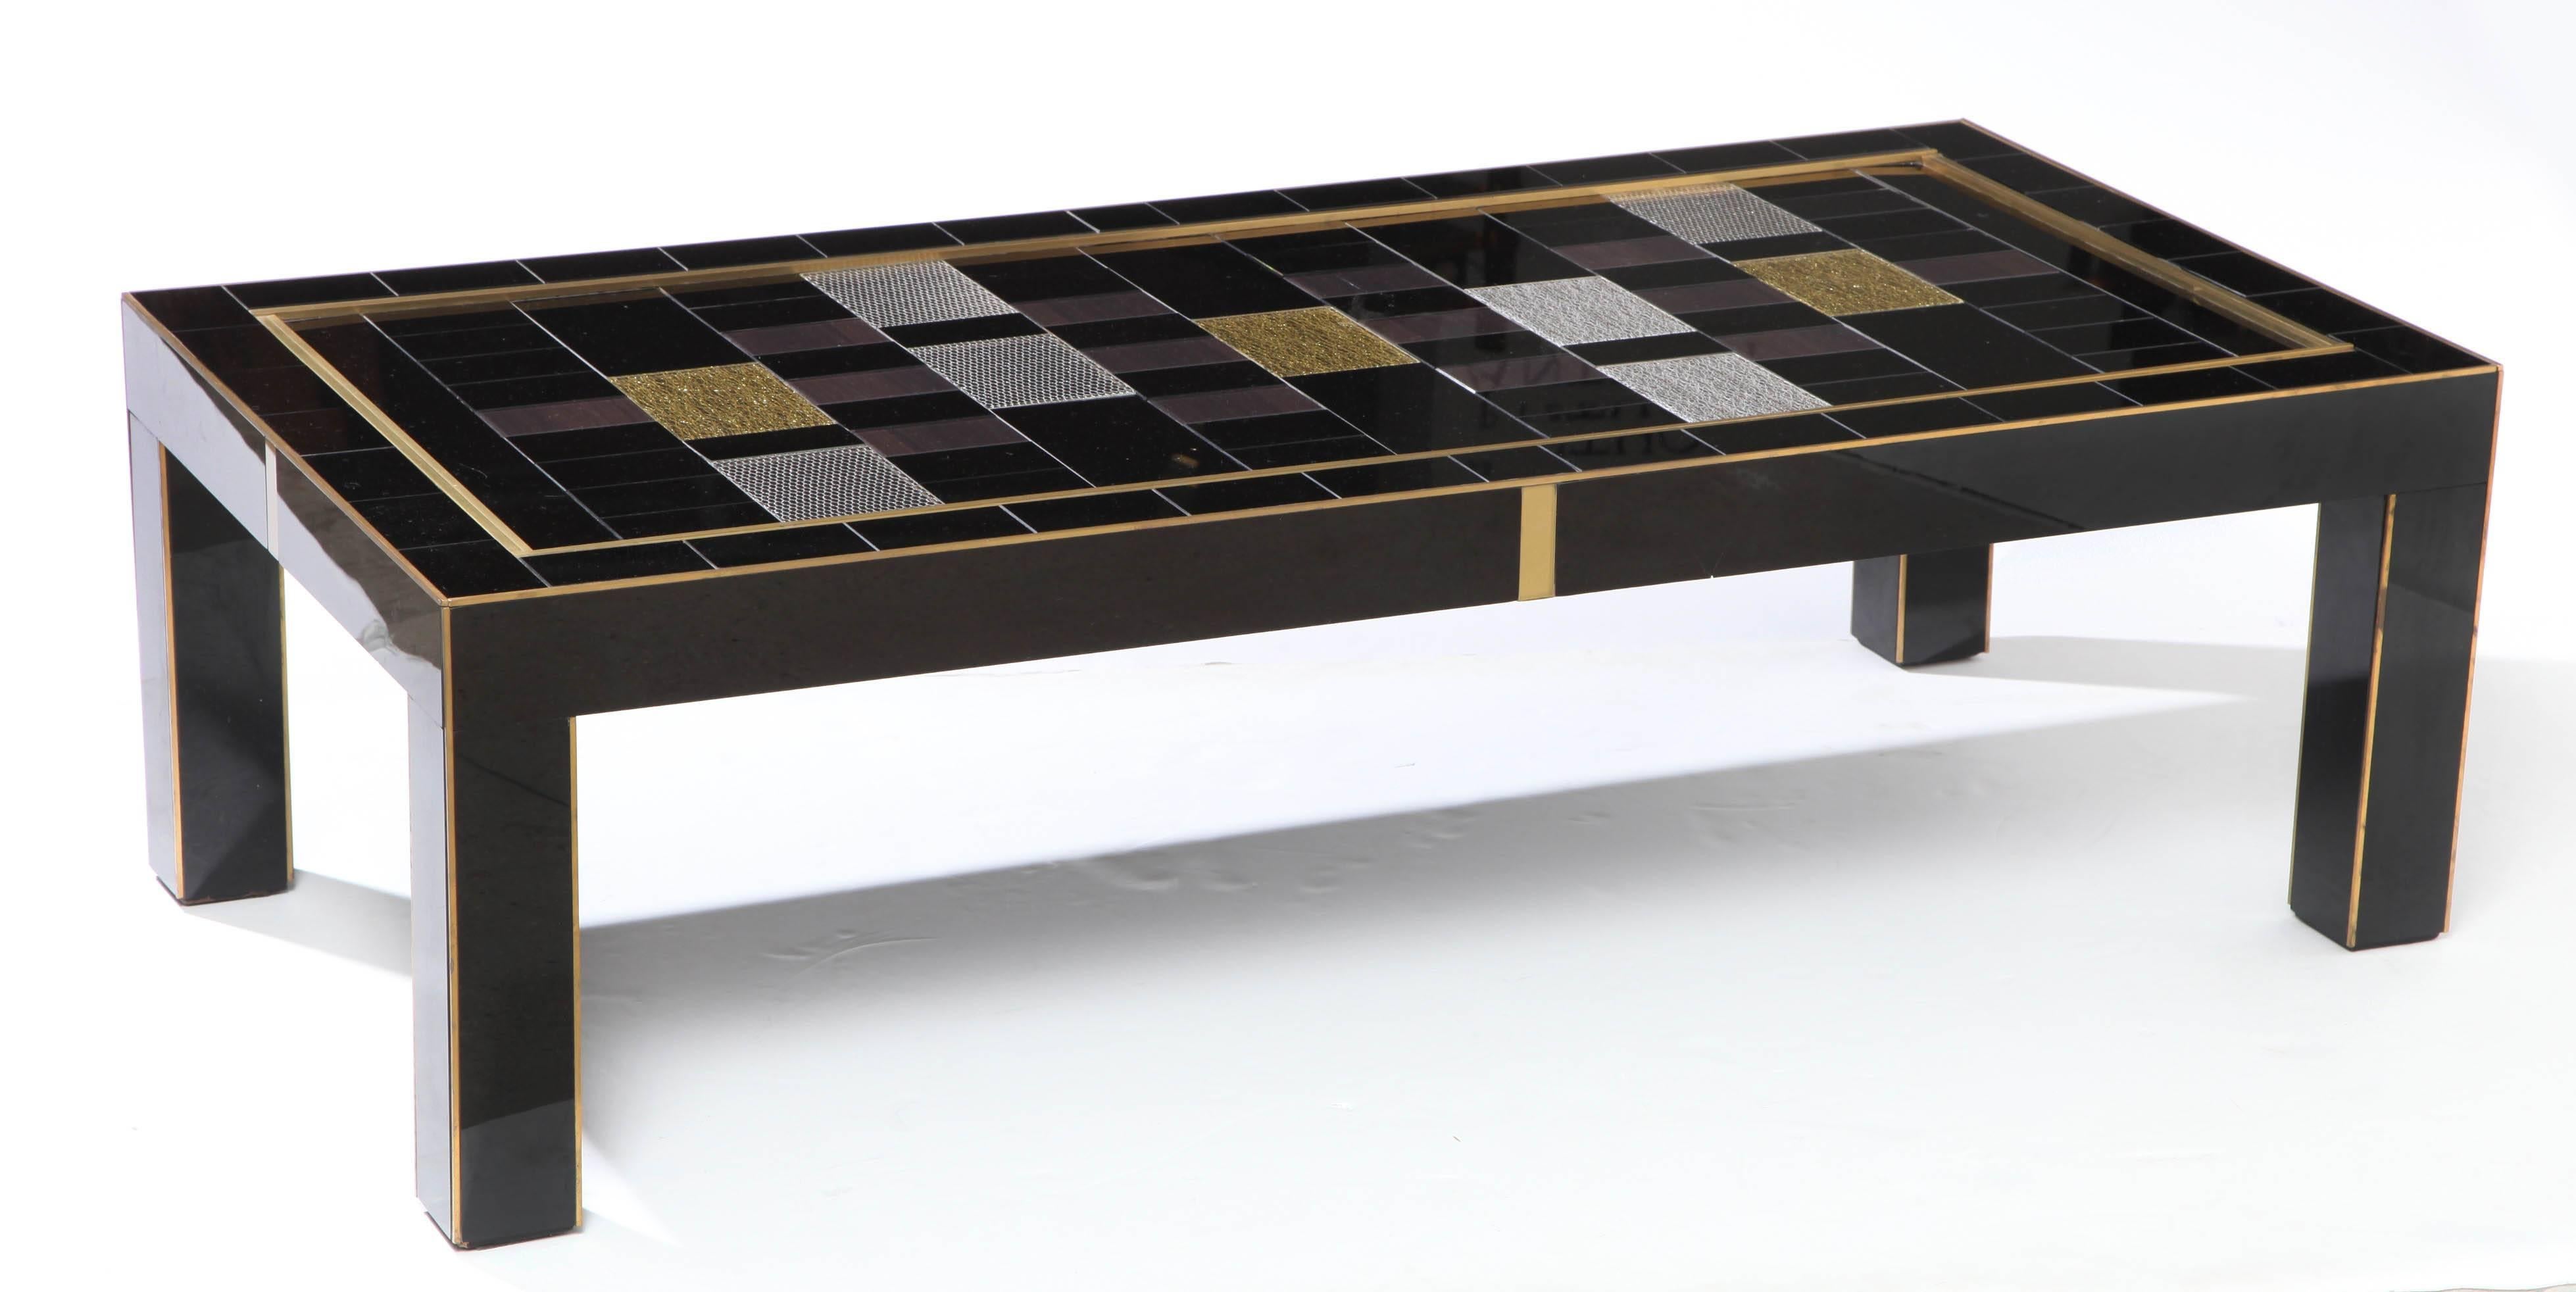 One of a kind, hand-crafted black, silver and gold tinted glass coffee or cocktail table with brass inlays handmade in Italy by a master artisan and artist. Wooden frame is veneered in a black, reverse tinted art glass with geometrically placed